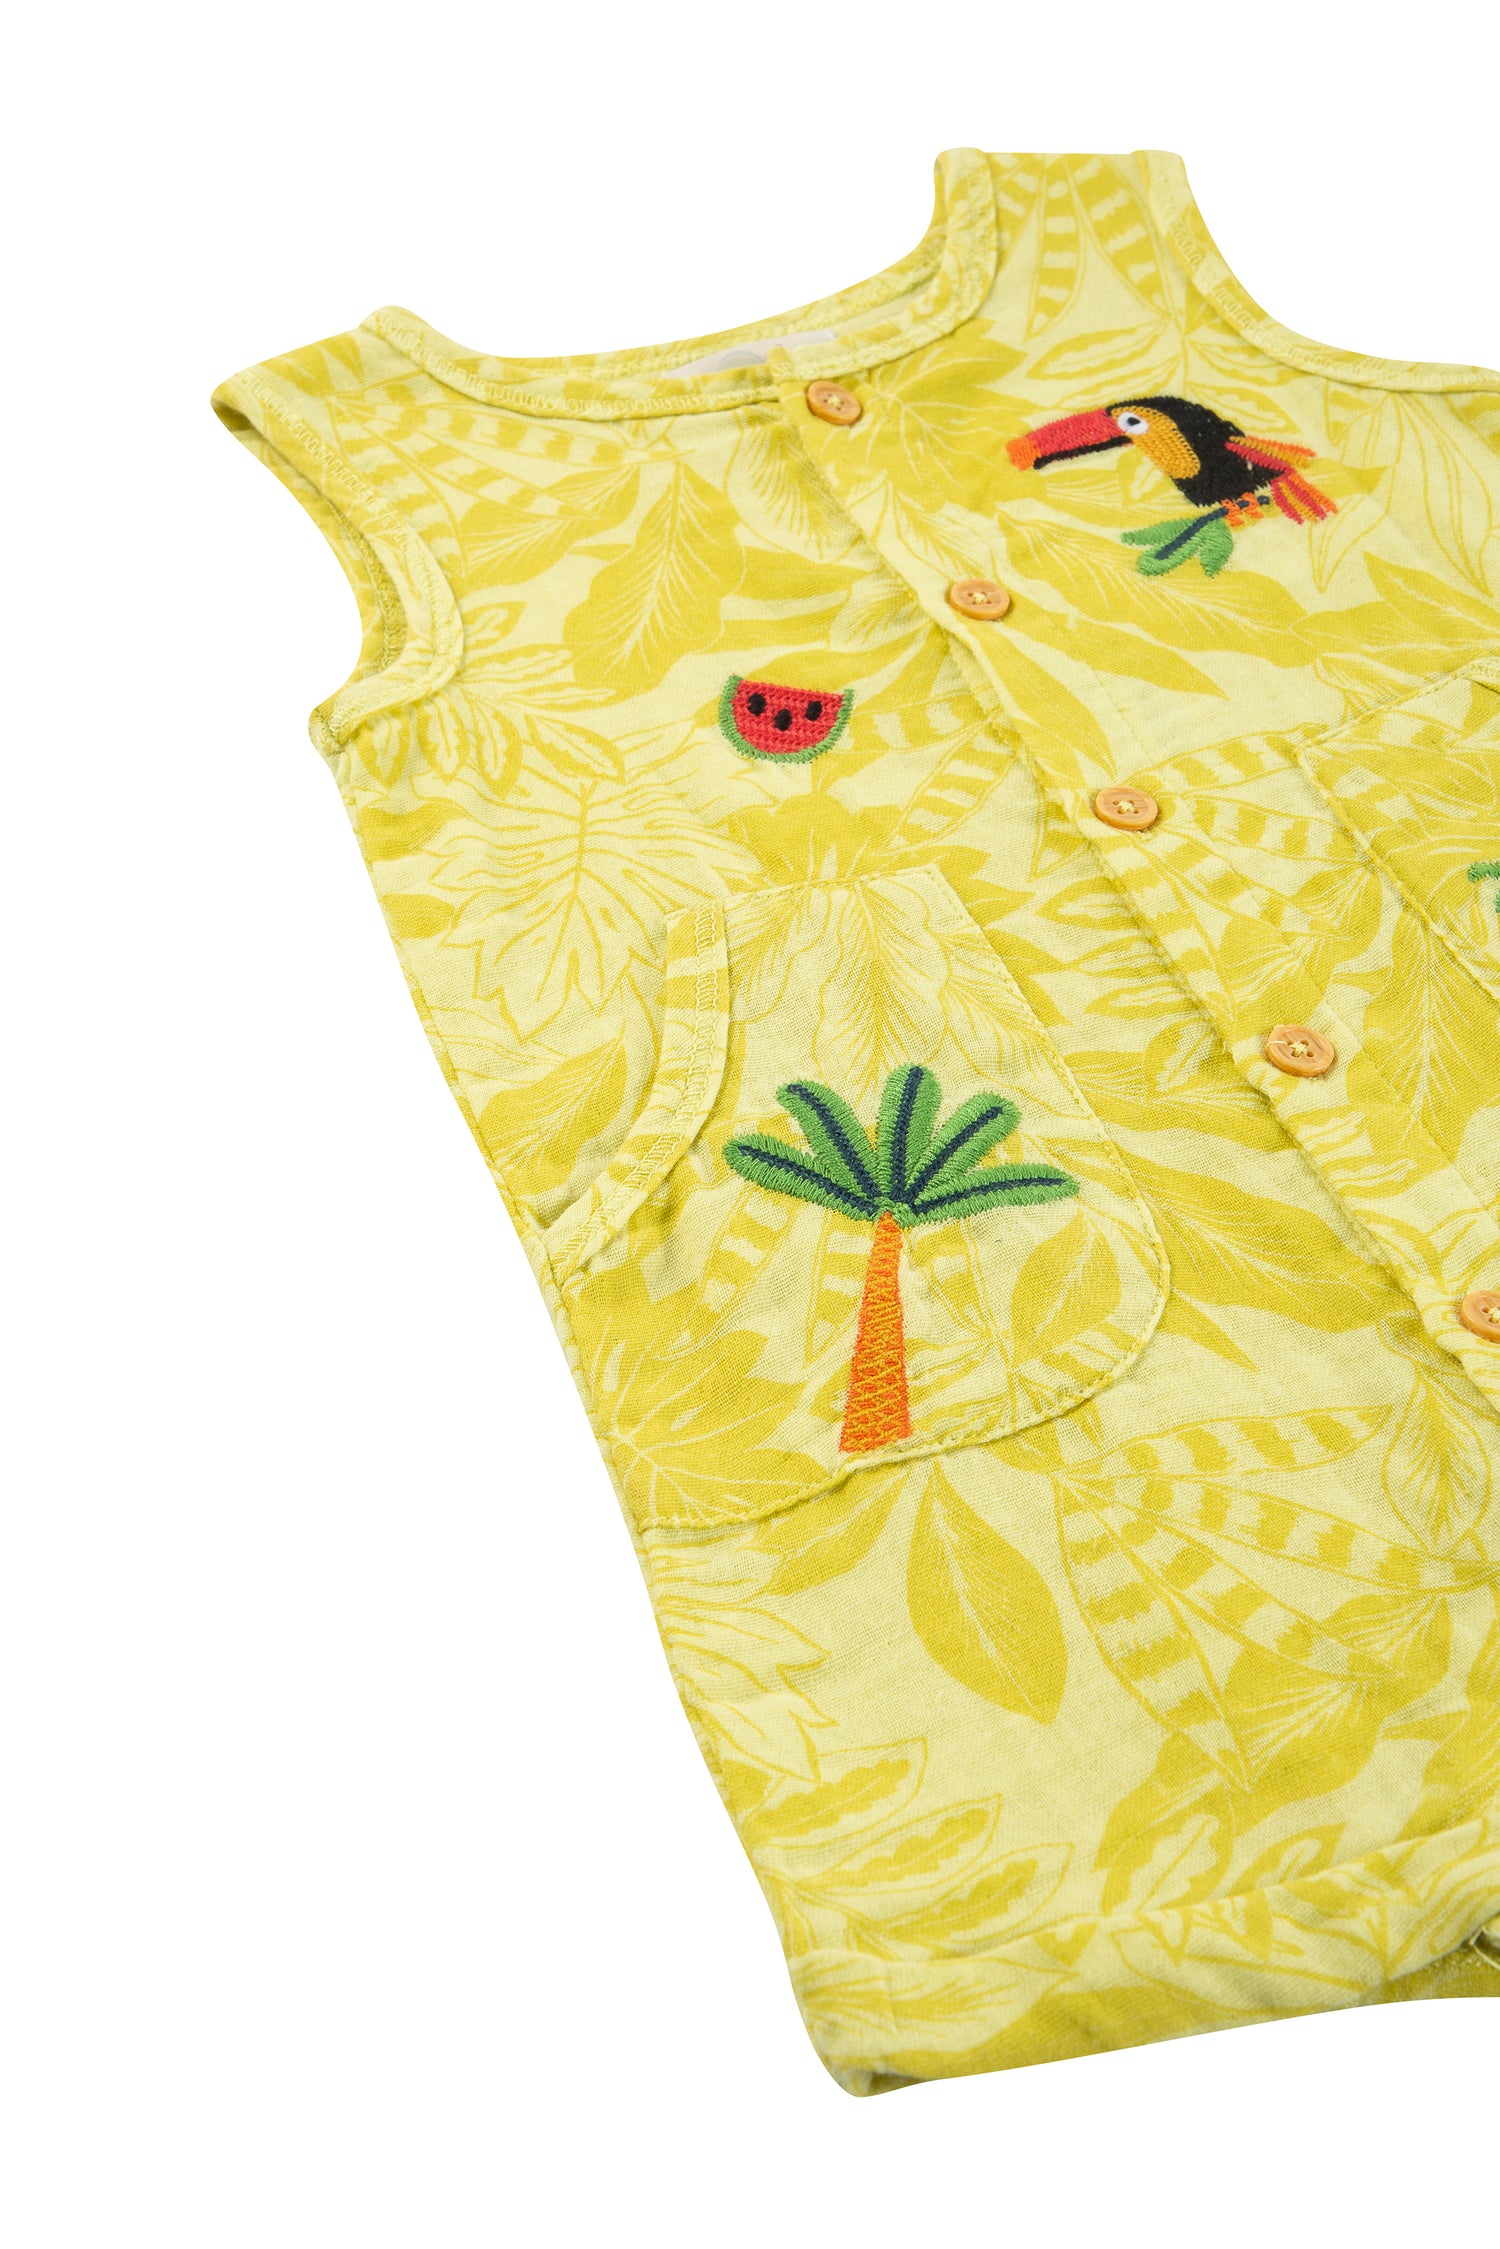 CLOSE UP OF YELLOW TROPICAL LEAF ROMPER WITH WATERMELON, TOUCAN AND PALM TREE EMBROIDERY